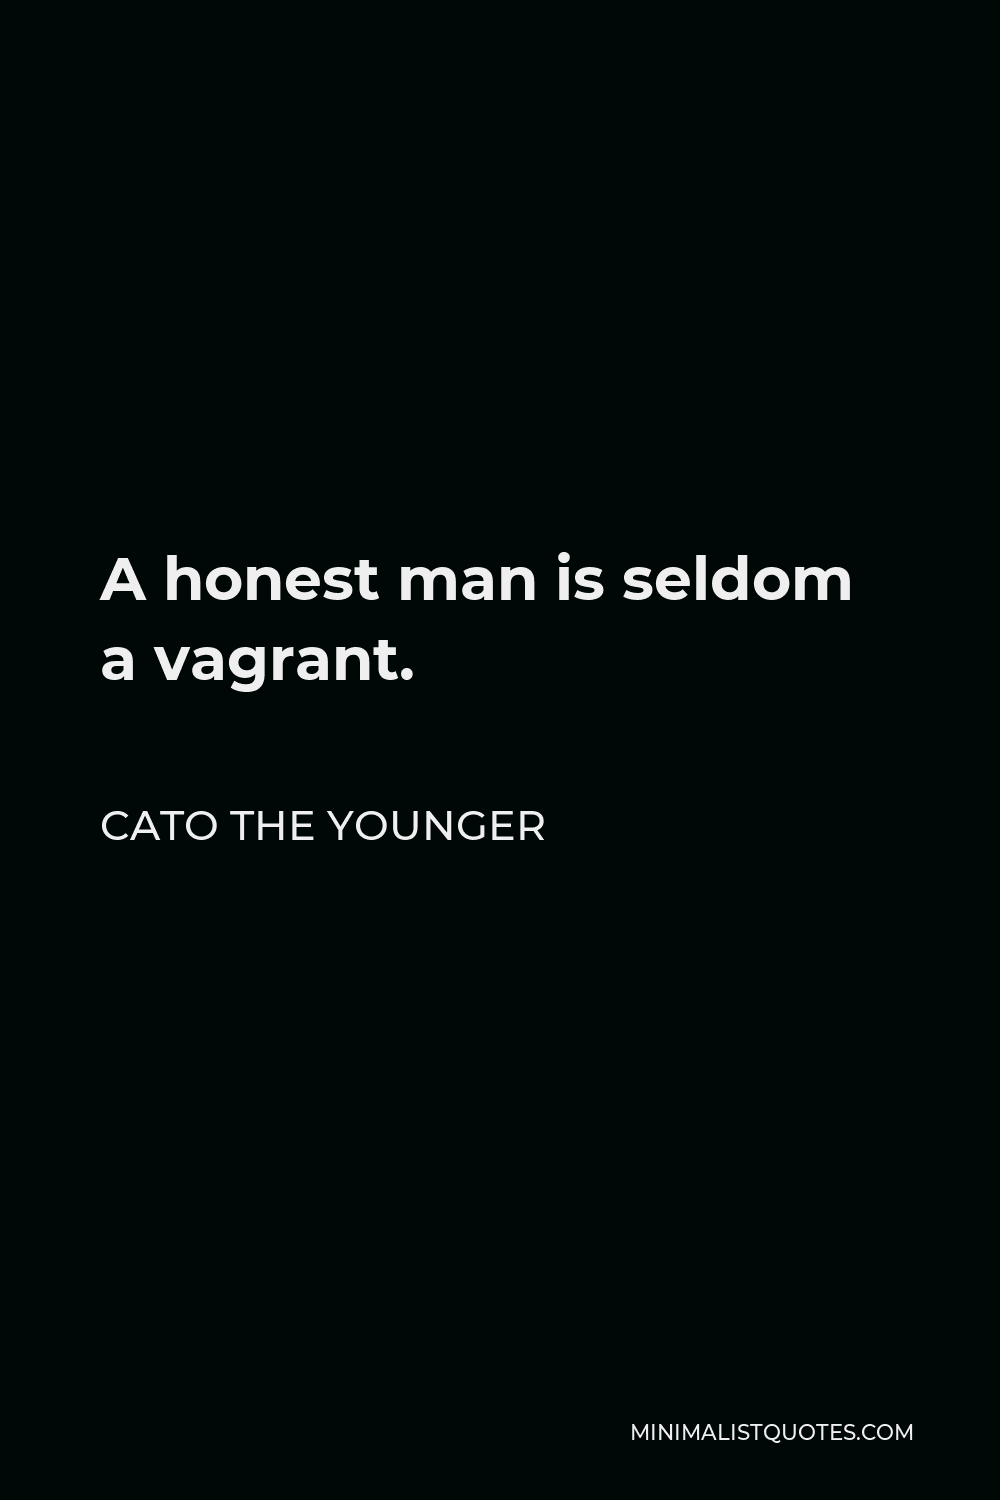 Cato the Younger Quote - A honest man is seldom a vagrant.